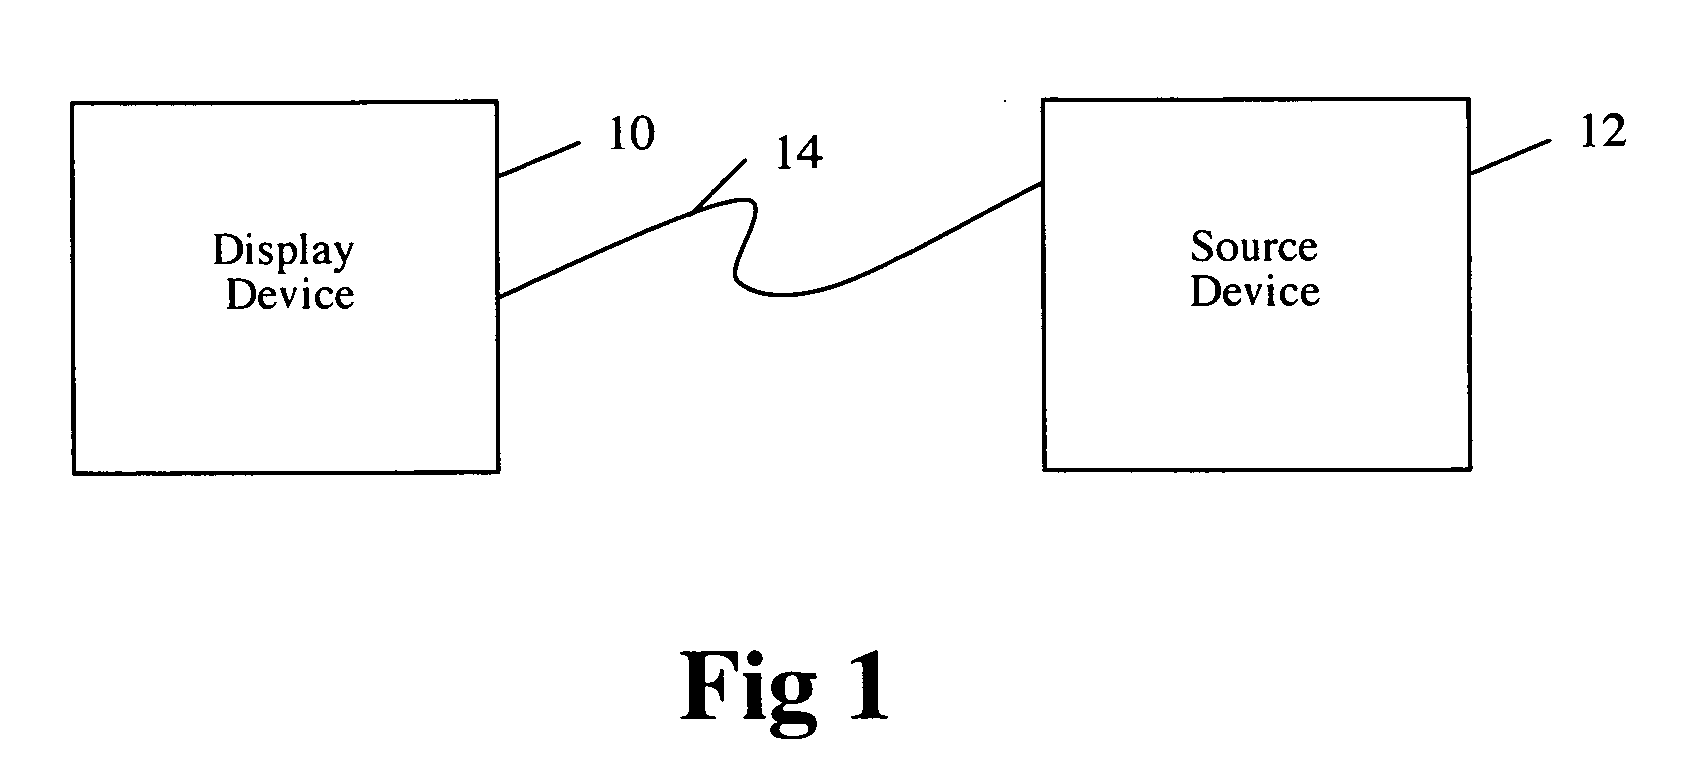 System for transmitting video streams using a plurality of levels of quality over a data network to a remote receiver